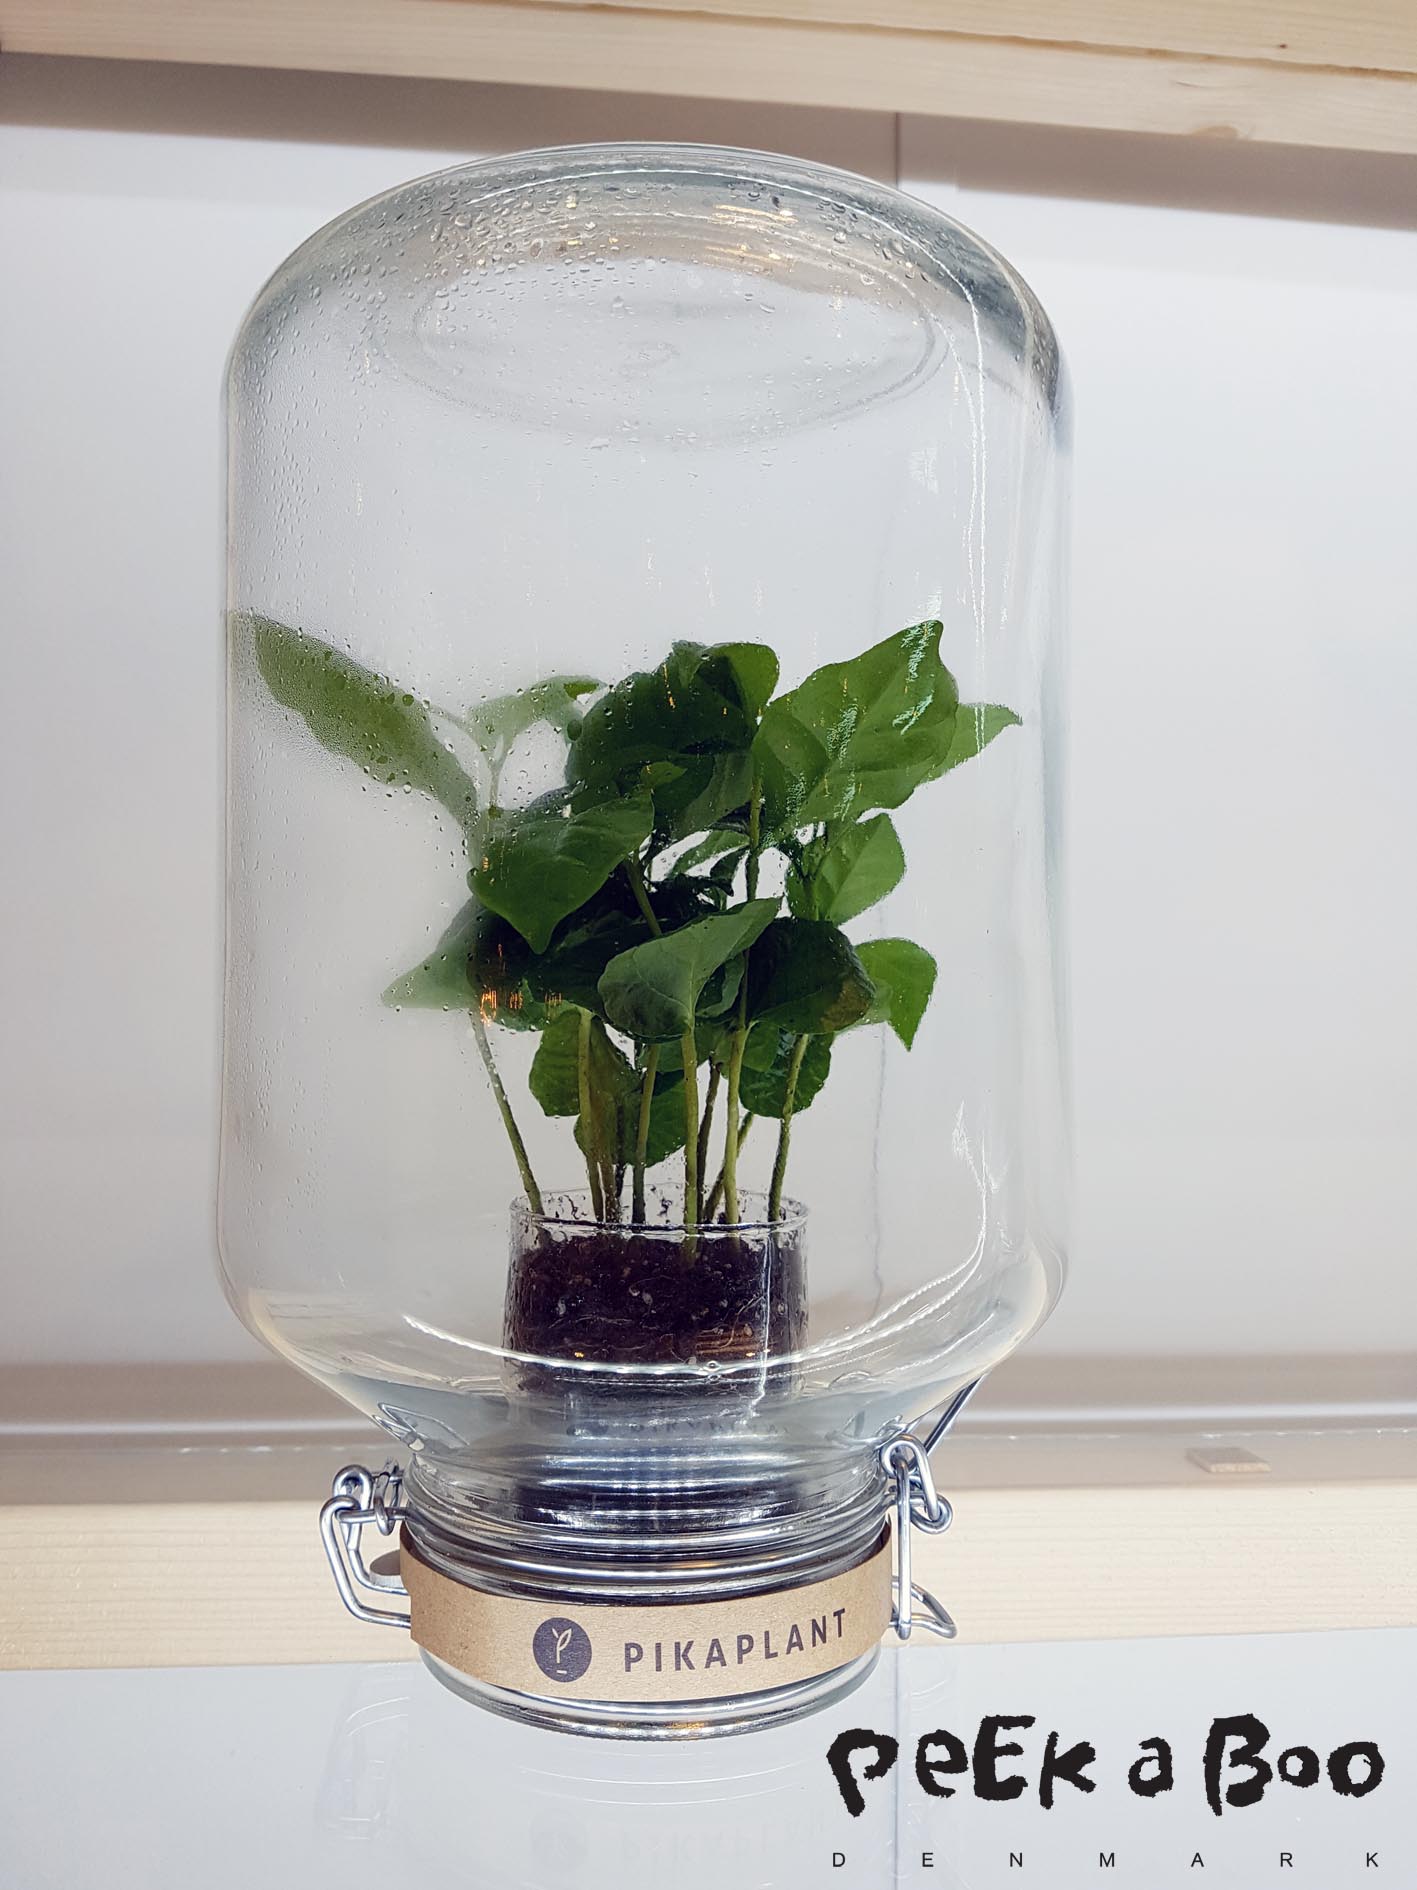 Pikaplants from Amsterdam. Coffee plants in a jar.